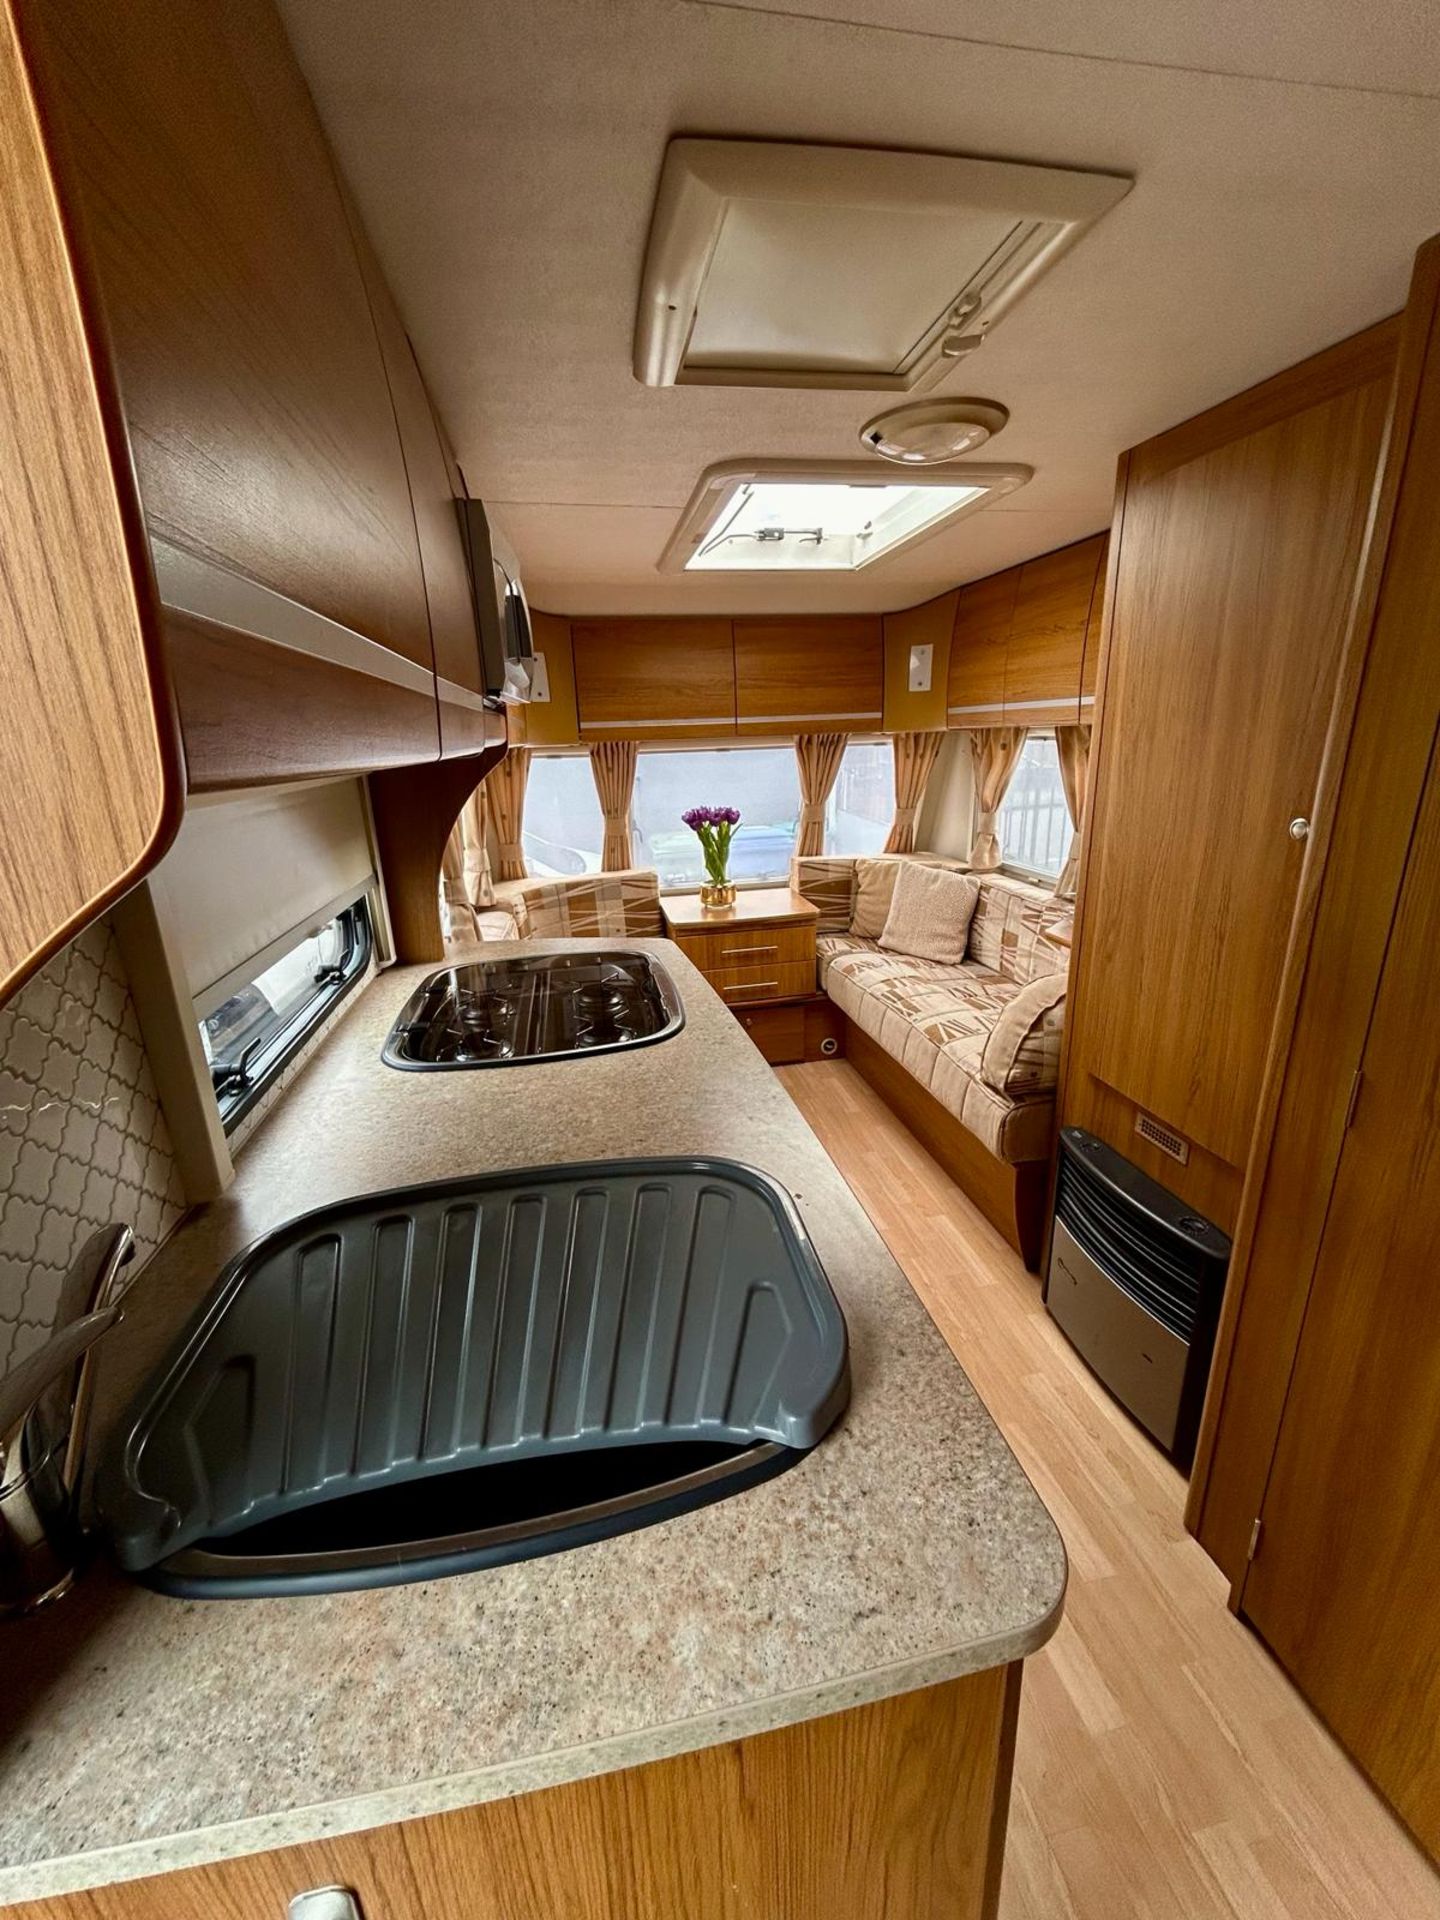 2010 BAILEY PAGEANT SERIES 7 MOVER & AWNING CARAVAN *NO VAT* - Image 12 of 19